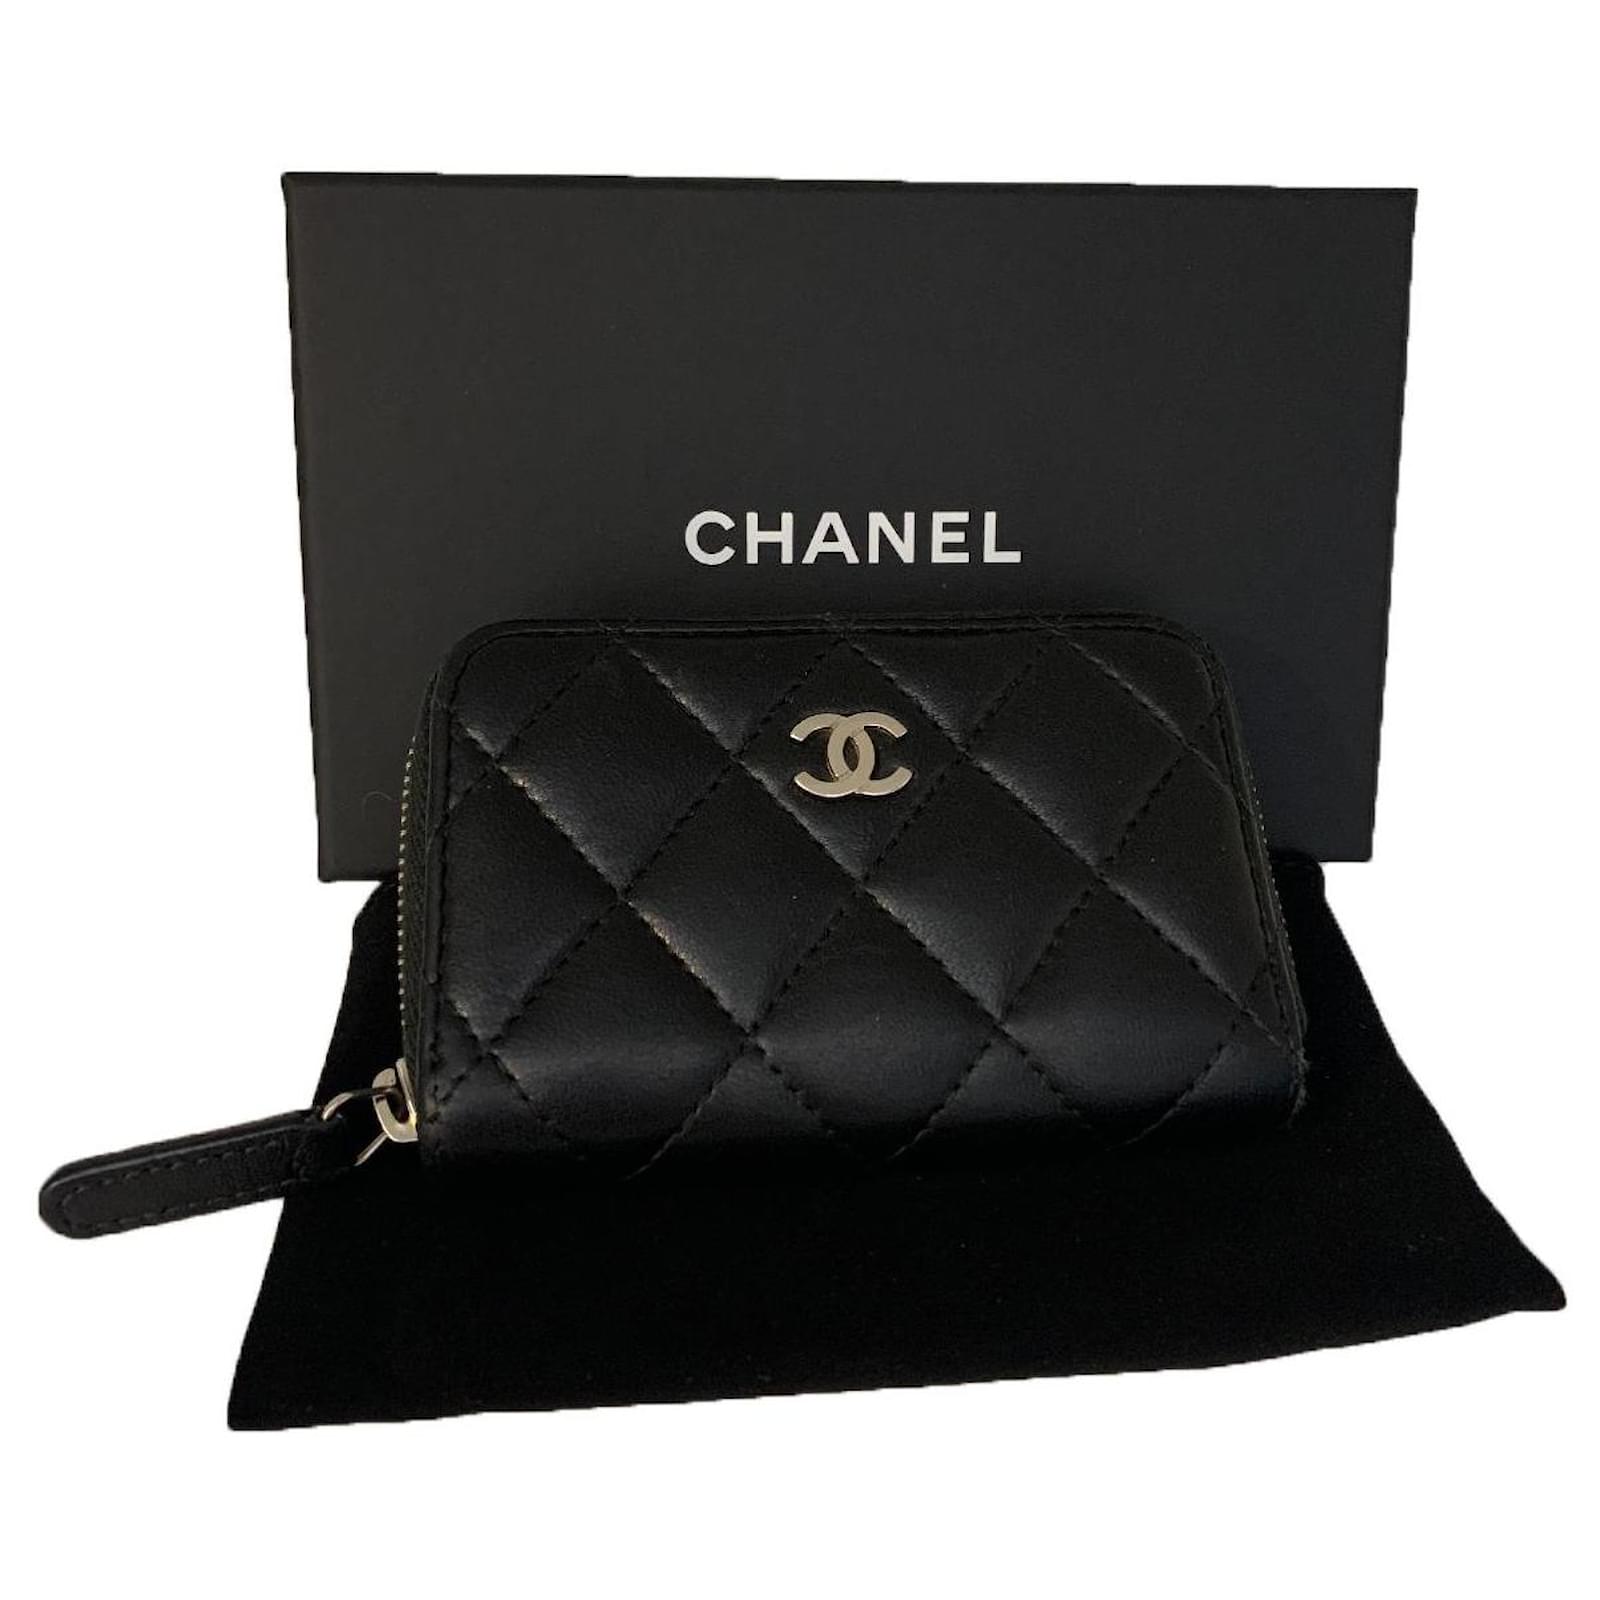 Chanel Black Lambskin Leather Quilted Coin Purse Key Ring